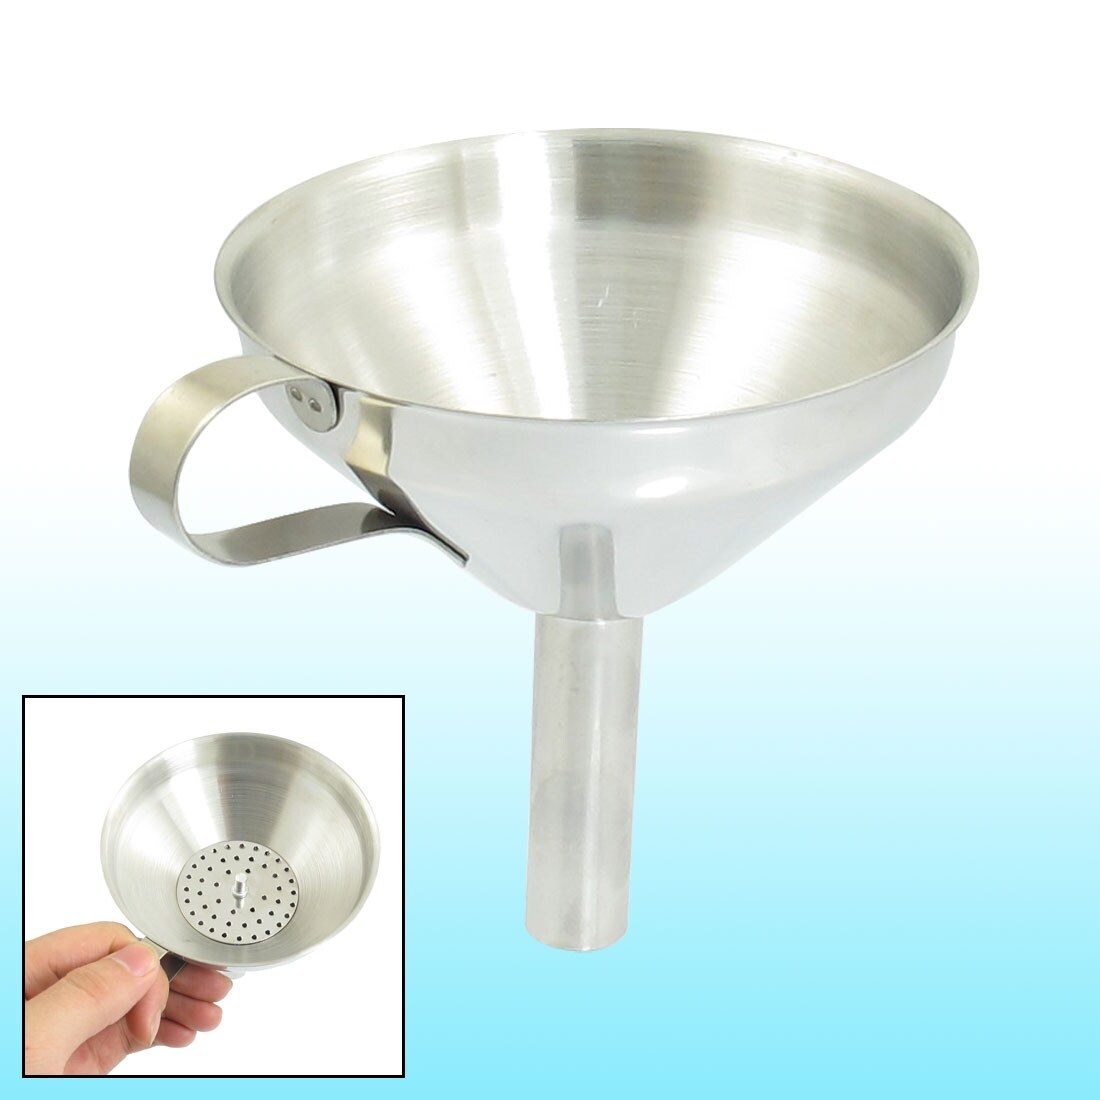 https://ak1.ostkcdn.com/images/products/is/images/direct/ed053455d89789095fa120c48ad535ff0f6e5428/Stainless-Steel-Laboratory-Kitchen-Filter-Funnel-4-Inch-Mouth-Dia.jpg